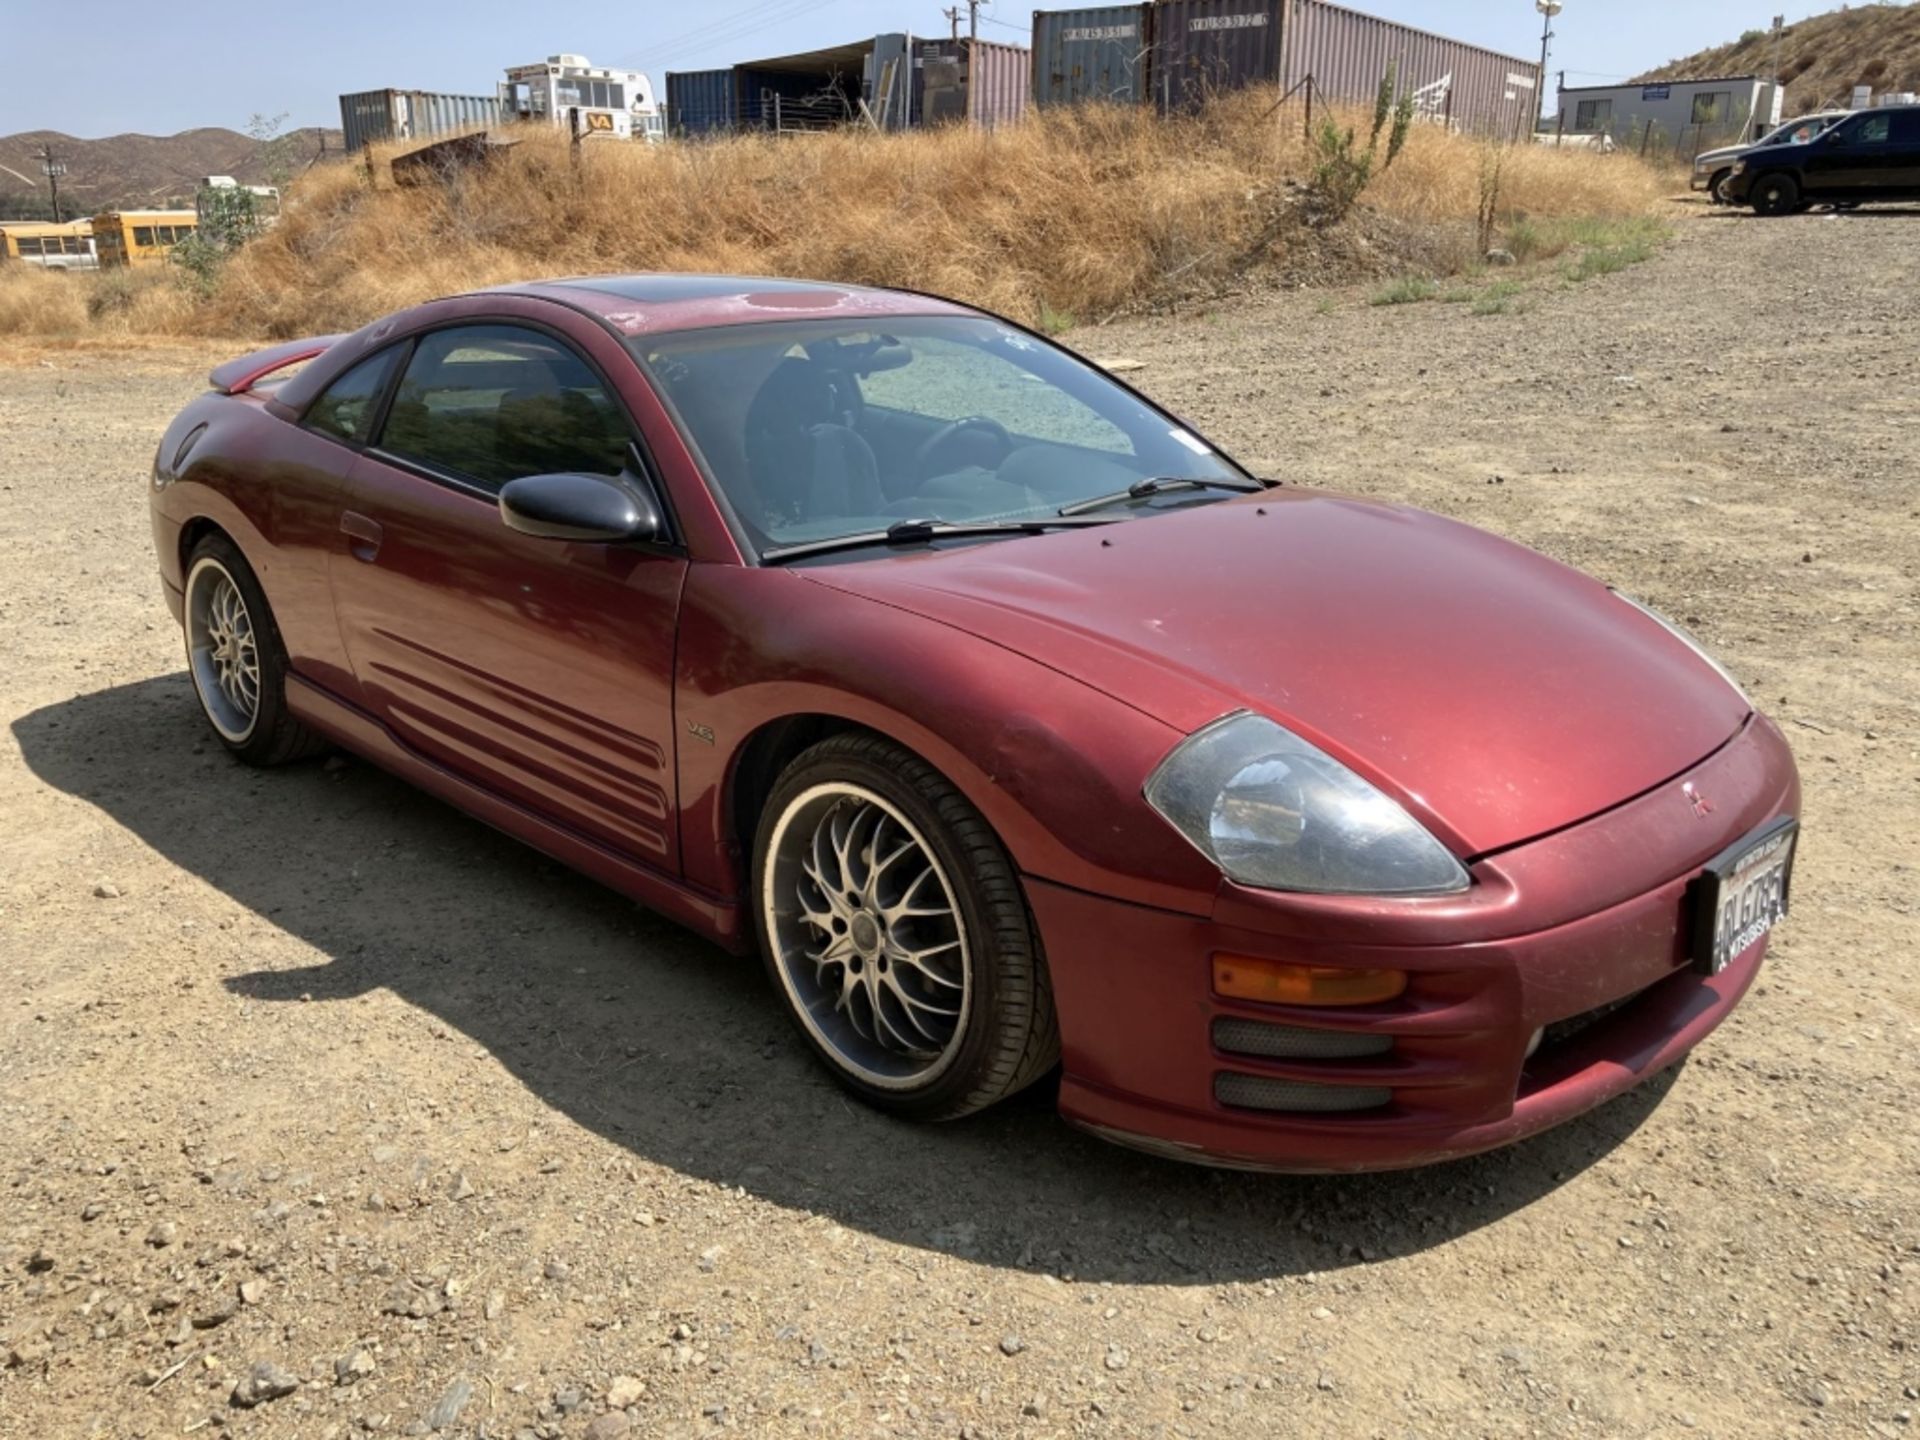 Mitsubishi Eclipse GT Coupe, - Image 2 of 17